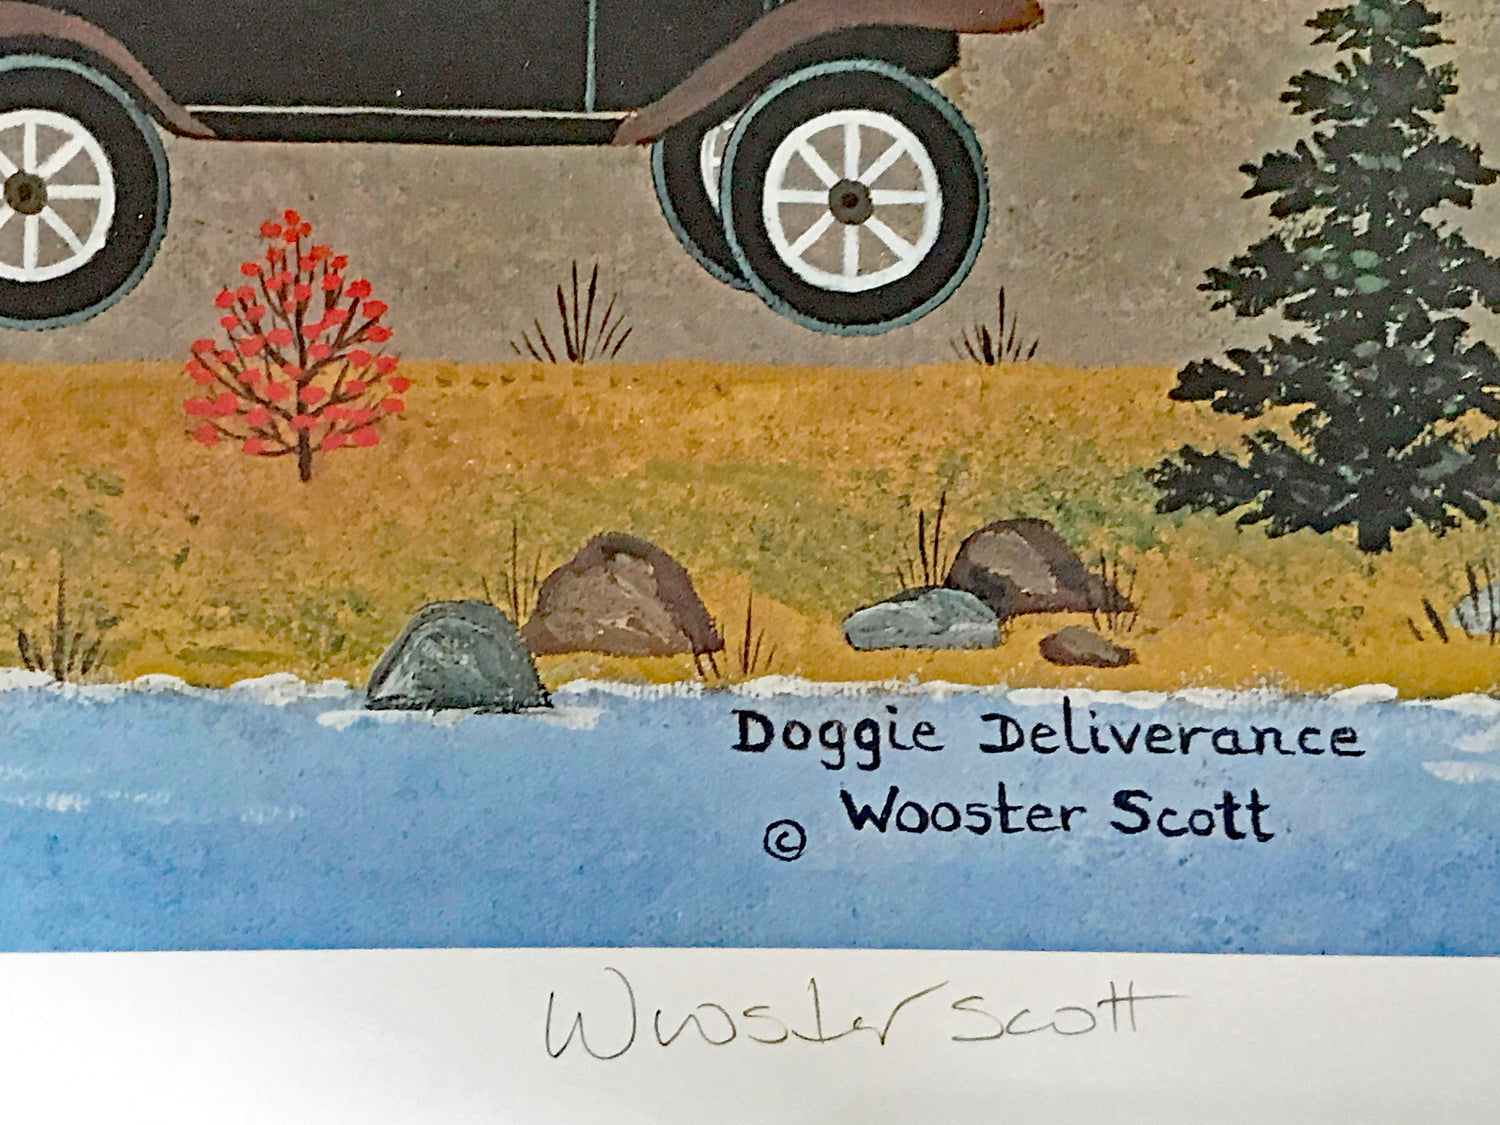 Doggie Deliverance Jane Wooster Scott Lithograph Print Artist Hand Signed and Numbered